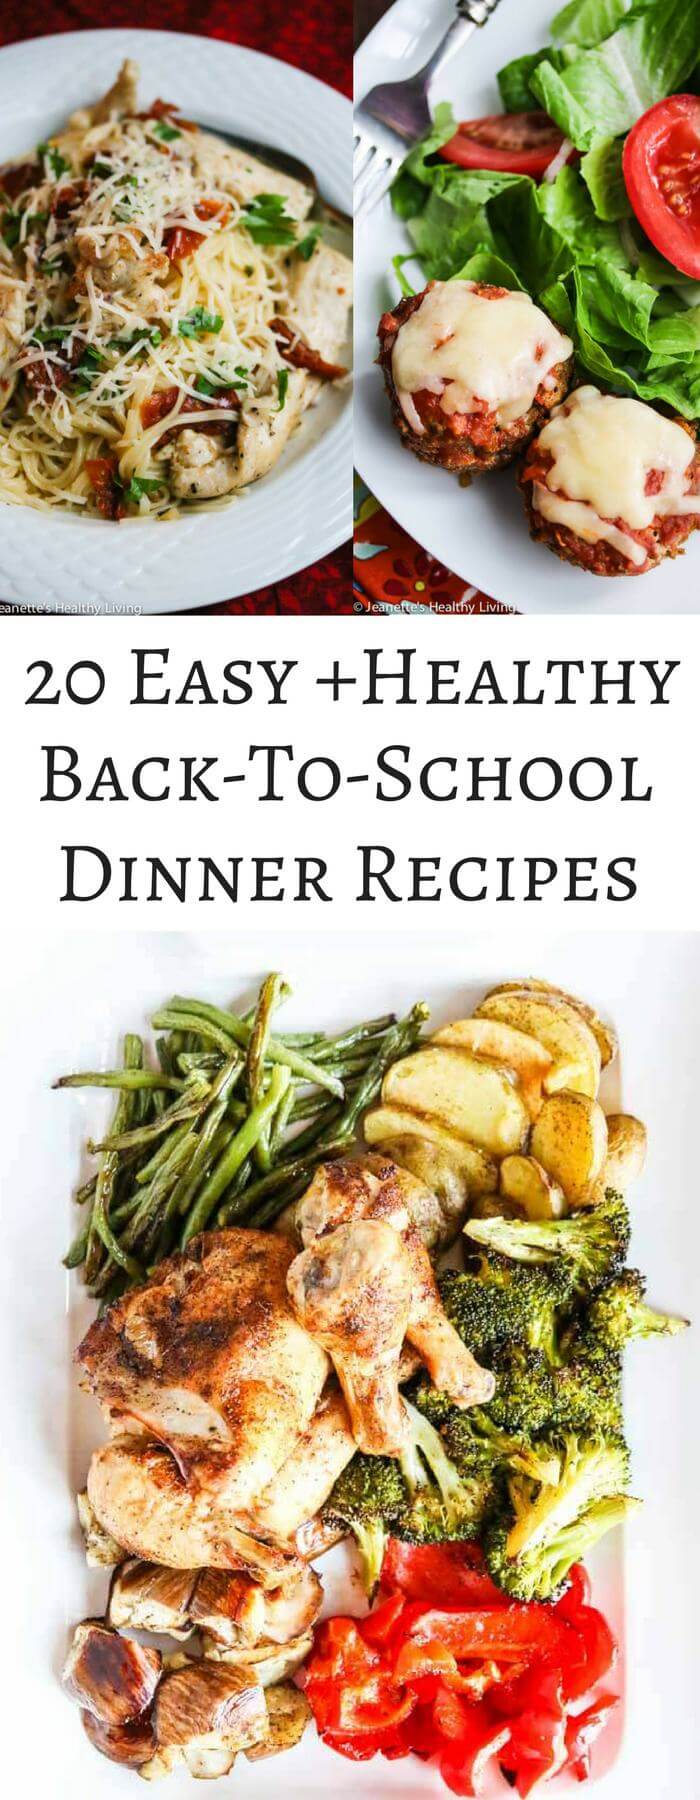 20 Easy Healthy Back-To-School Dinner Recipes - a collection of simple recipes that take less than 30 minutes to cook plus easy slow cooker recipes